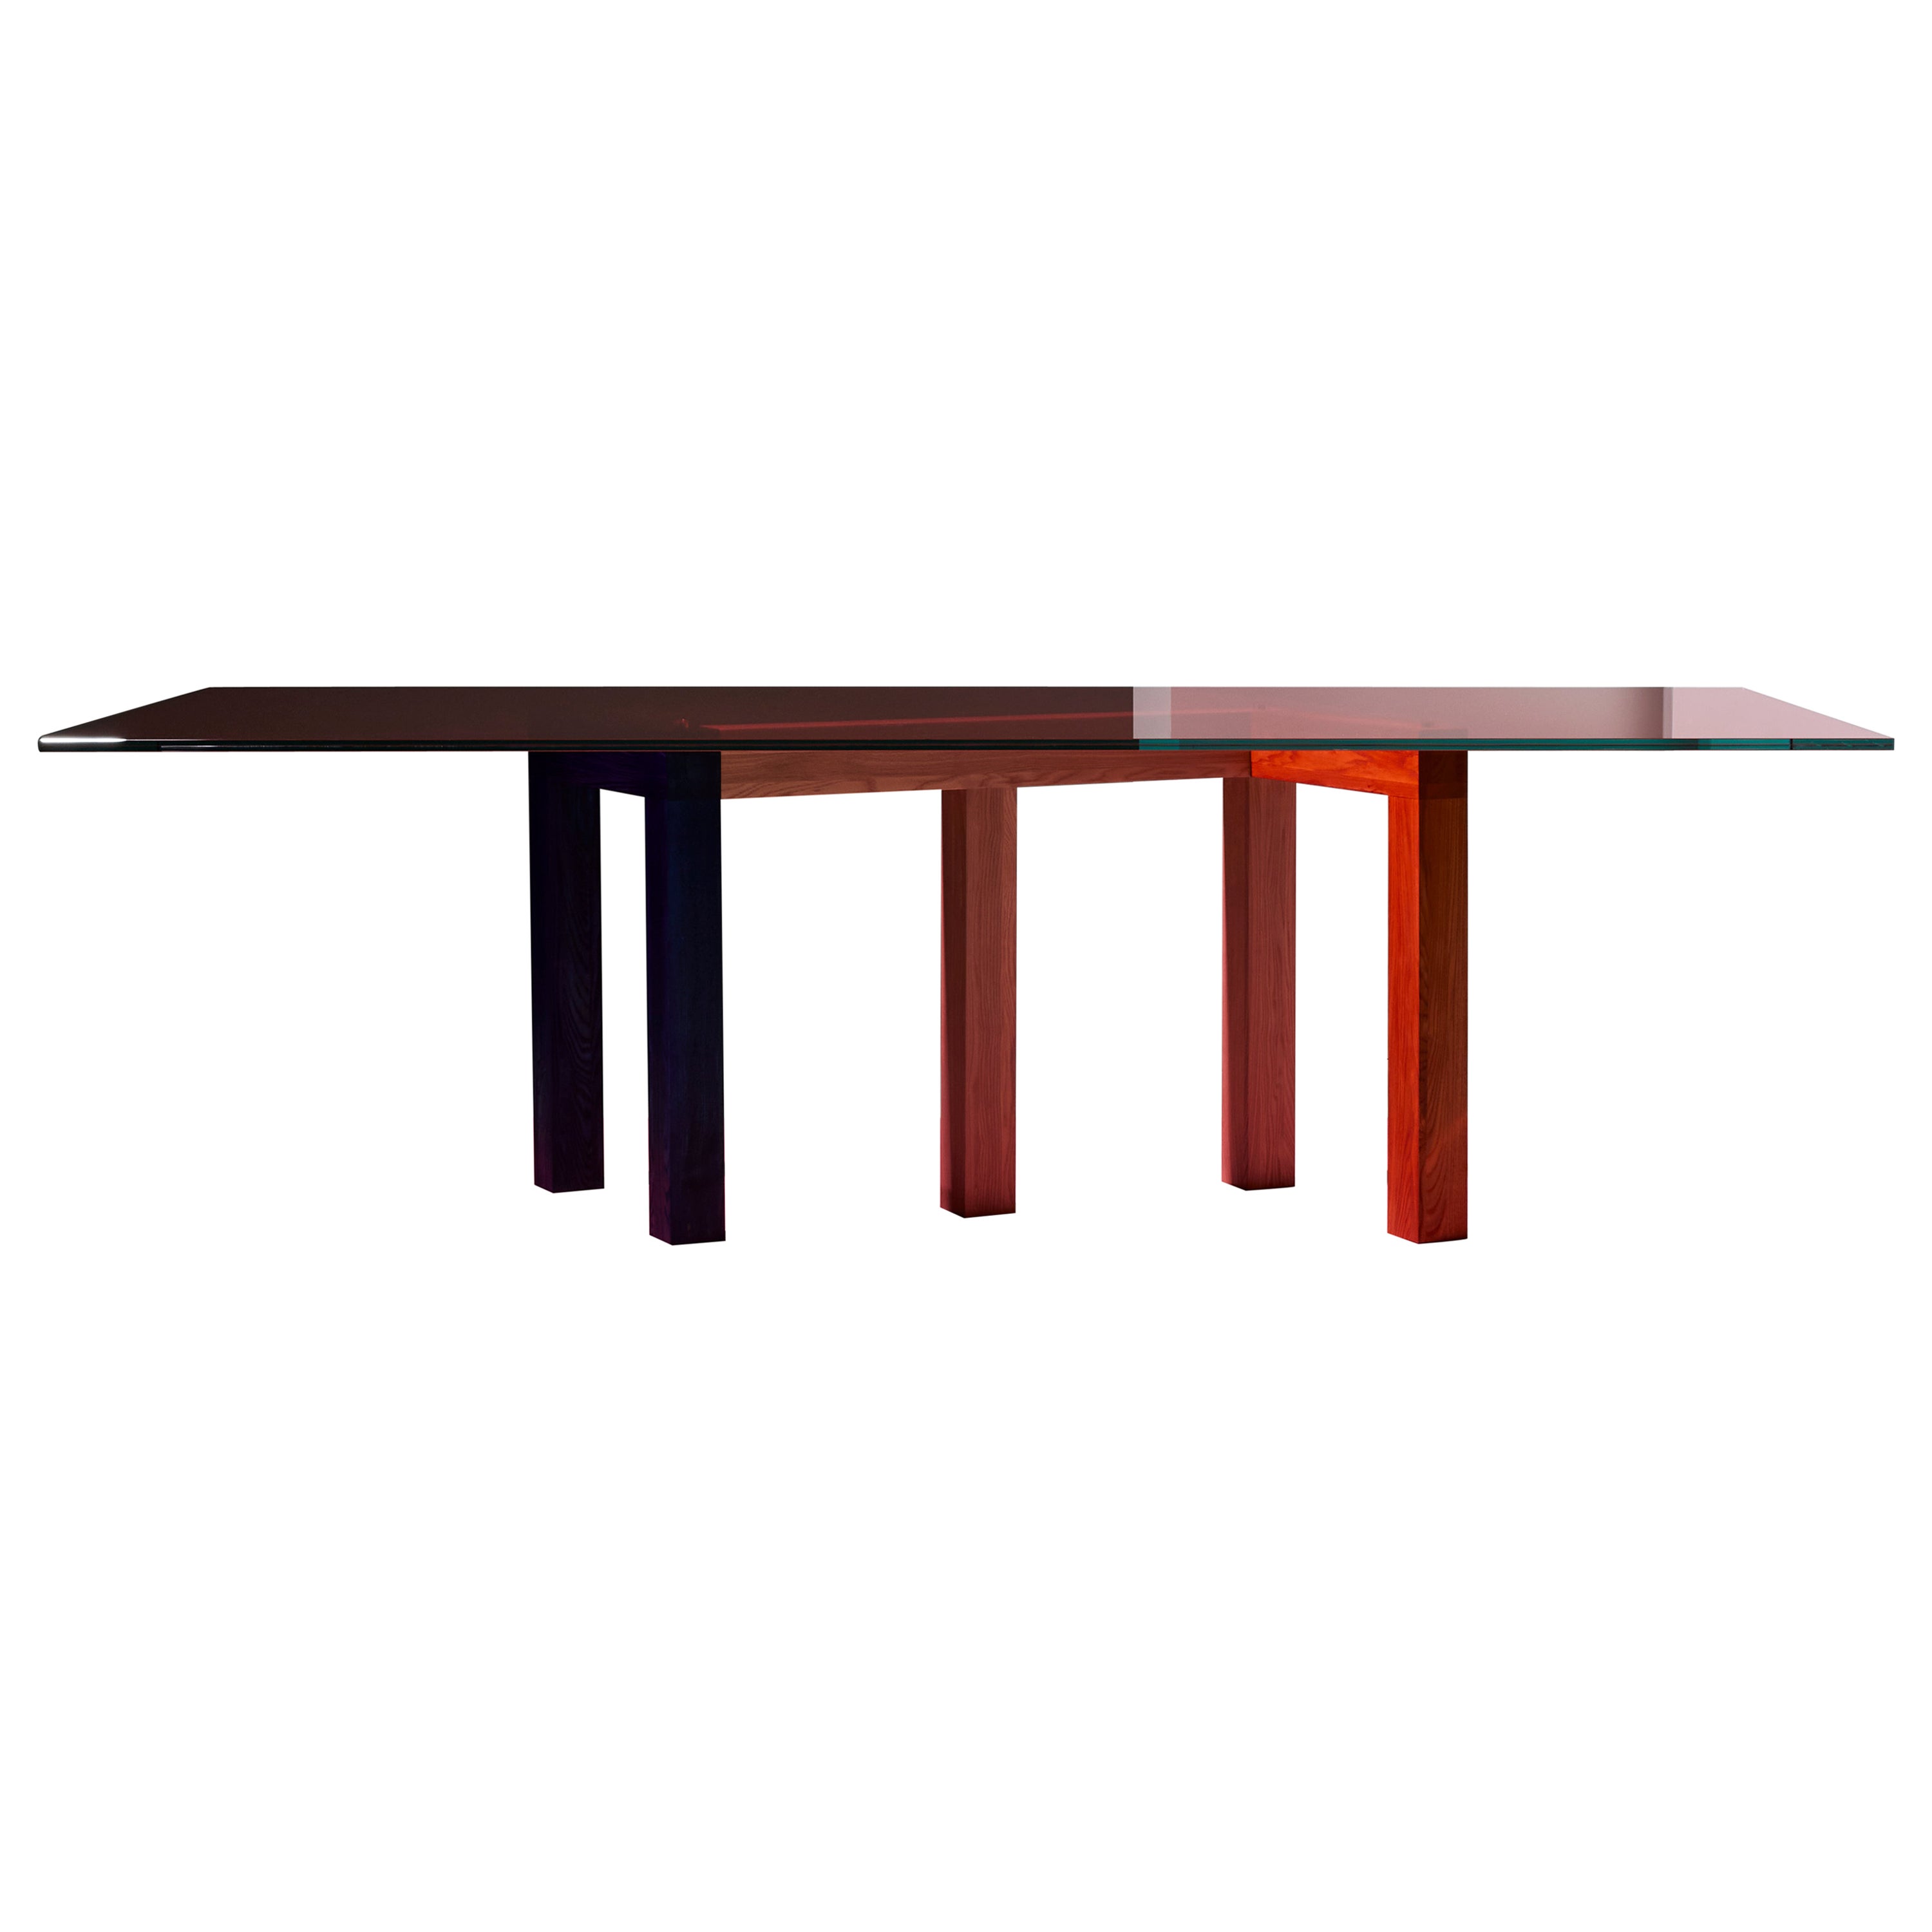 Penrose Dinner Table, Colored Legs, Pink Glass, by Hayo Gebauer for La Chance